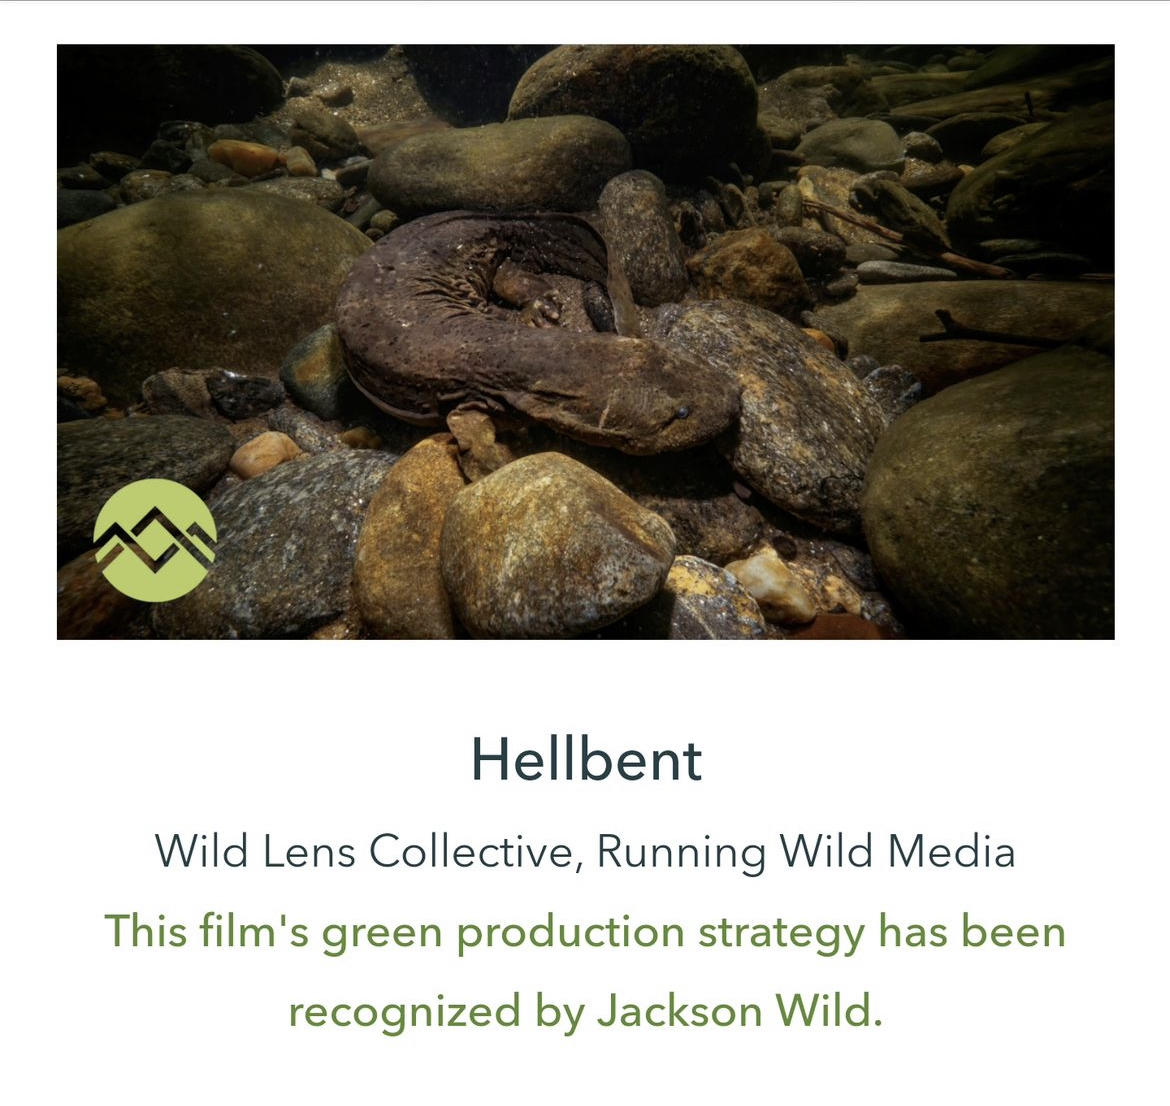 Hellbent has been recognized by @JacksonWild for our green production strategy. We worked hard to keep our footprint low throughout production, ensuring every step of our journey was taken with the environment in mind. More about our film ➡ hellbentfilm.com #wildlifefilm